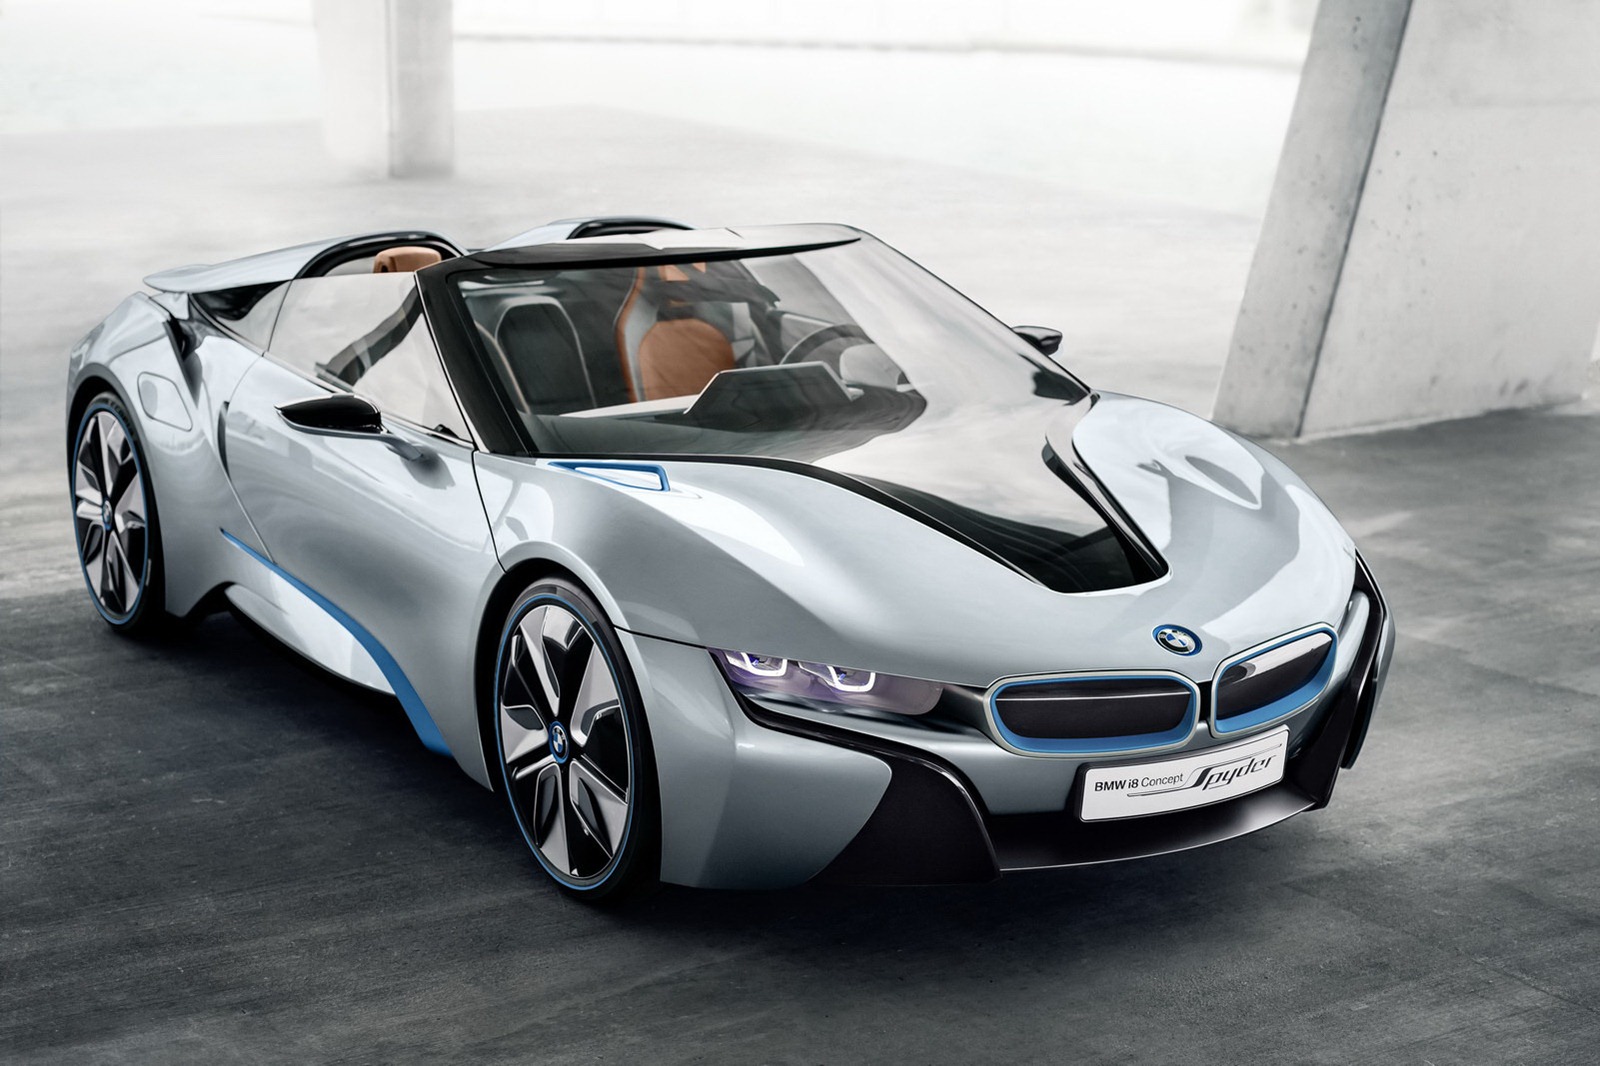 BMW i sub-brand could be in trouble